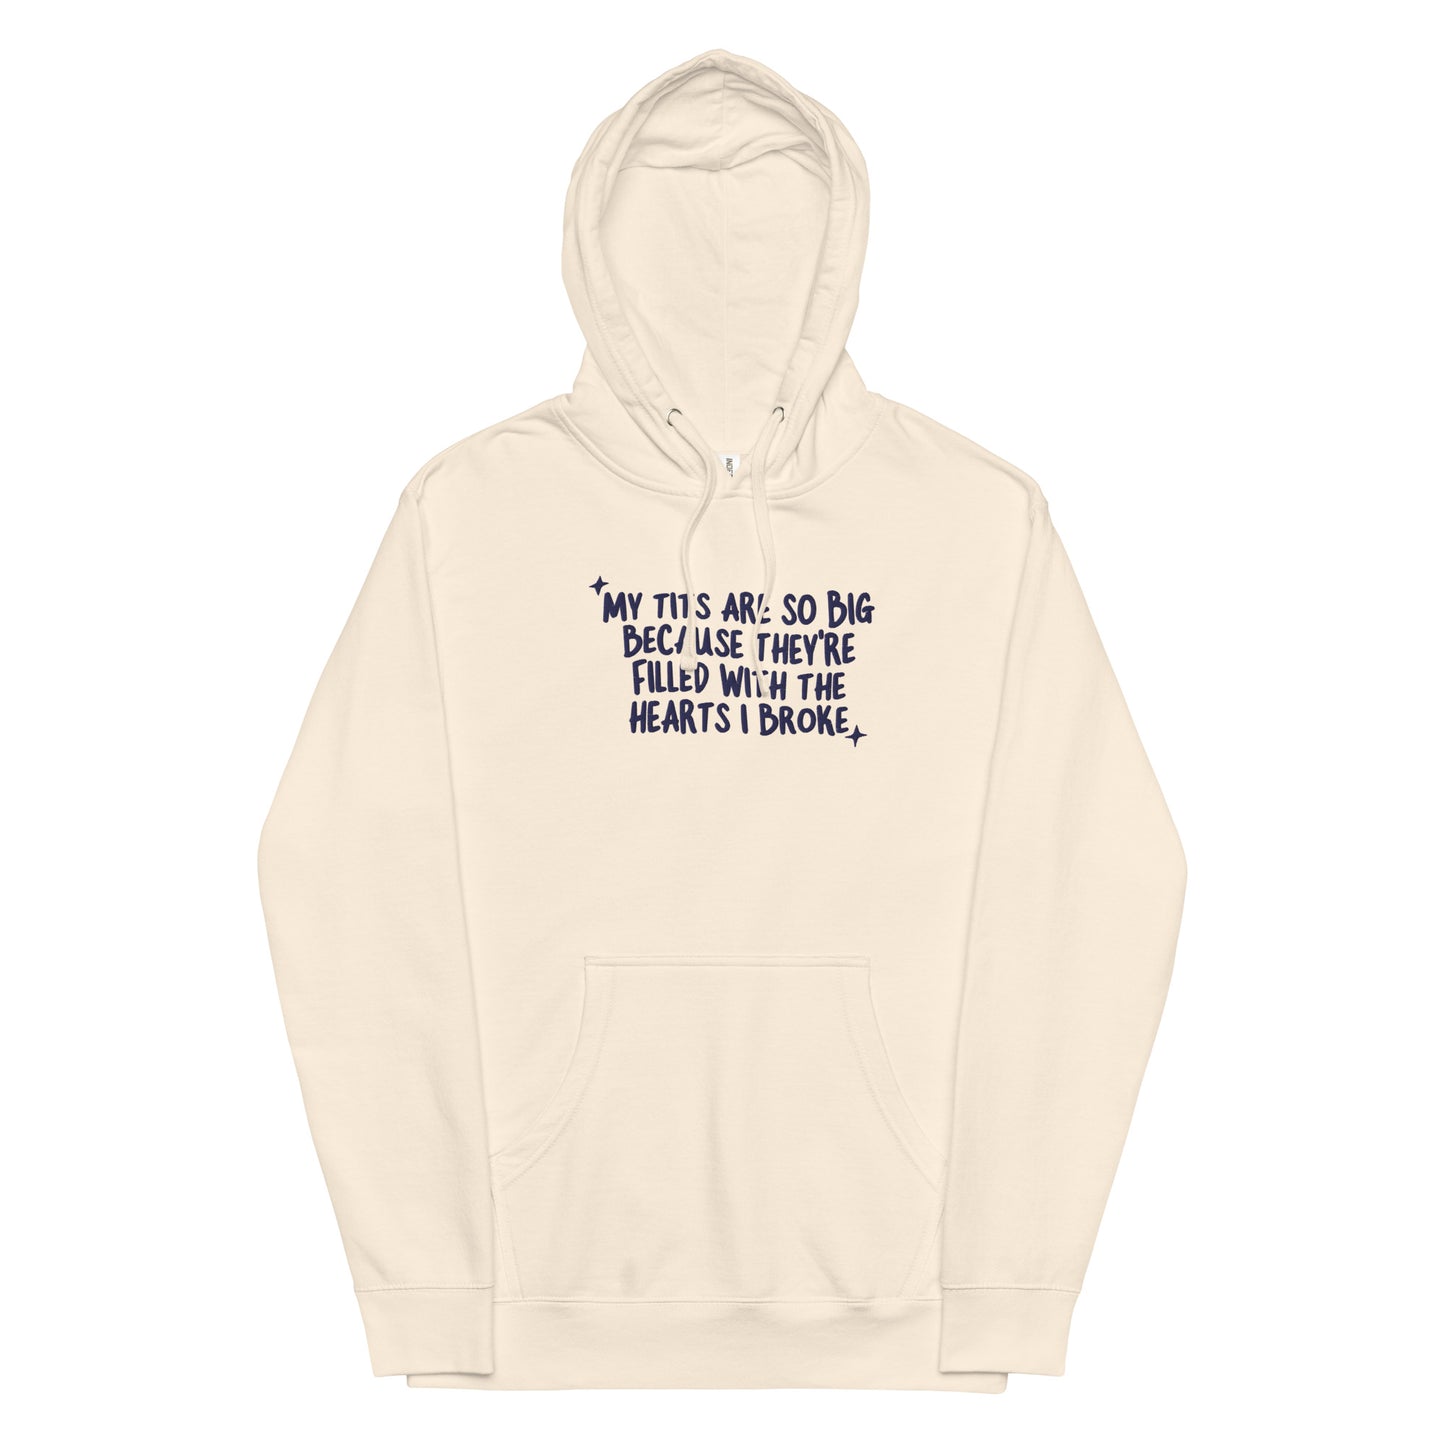 My Tits Are So Big (Hearts I Broke) Embroidered Unisex hoodie